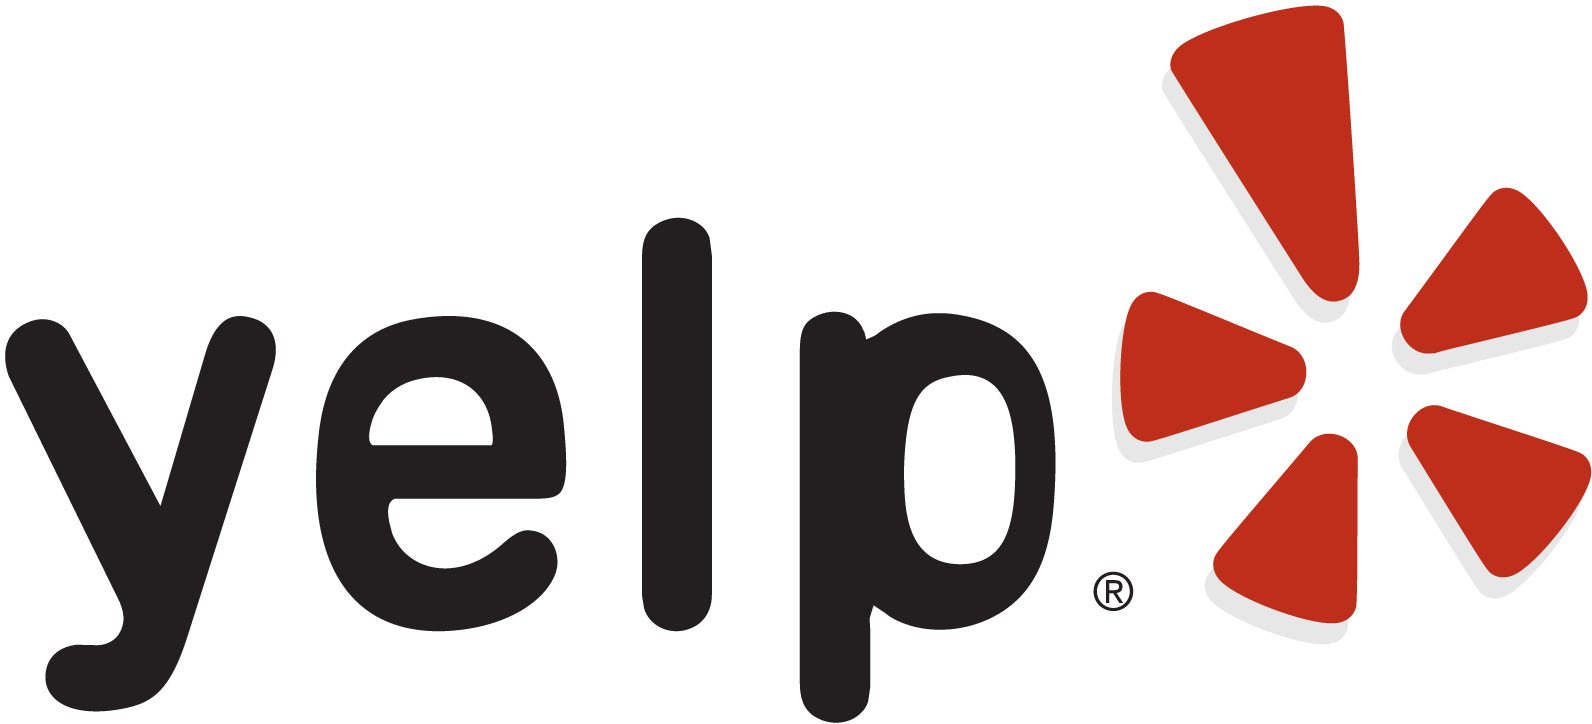 How to List Your Salon on Yelp